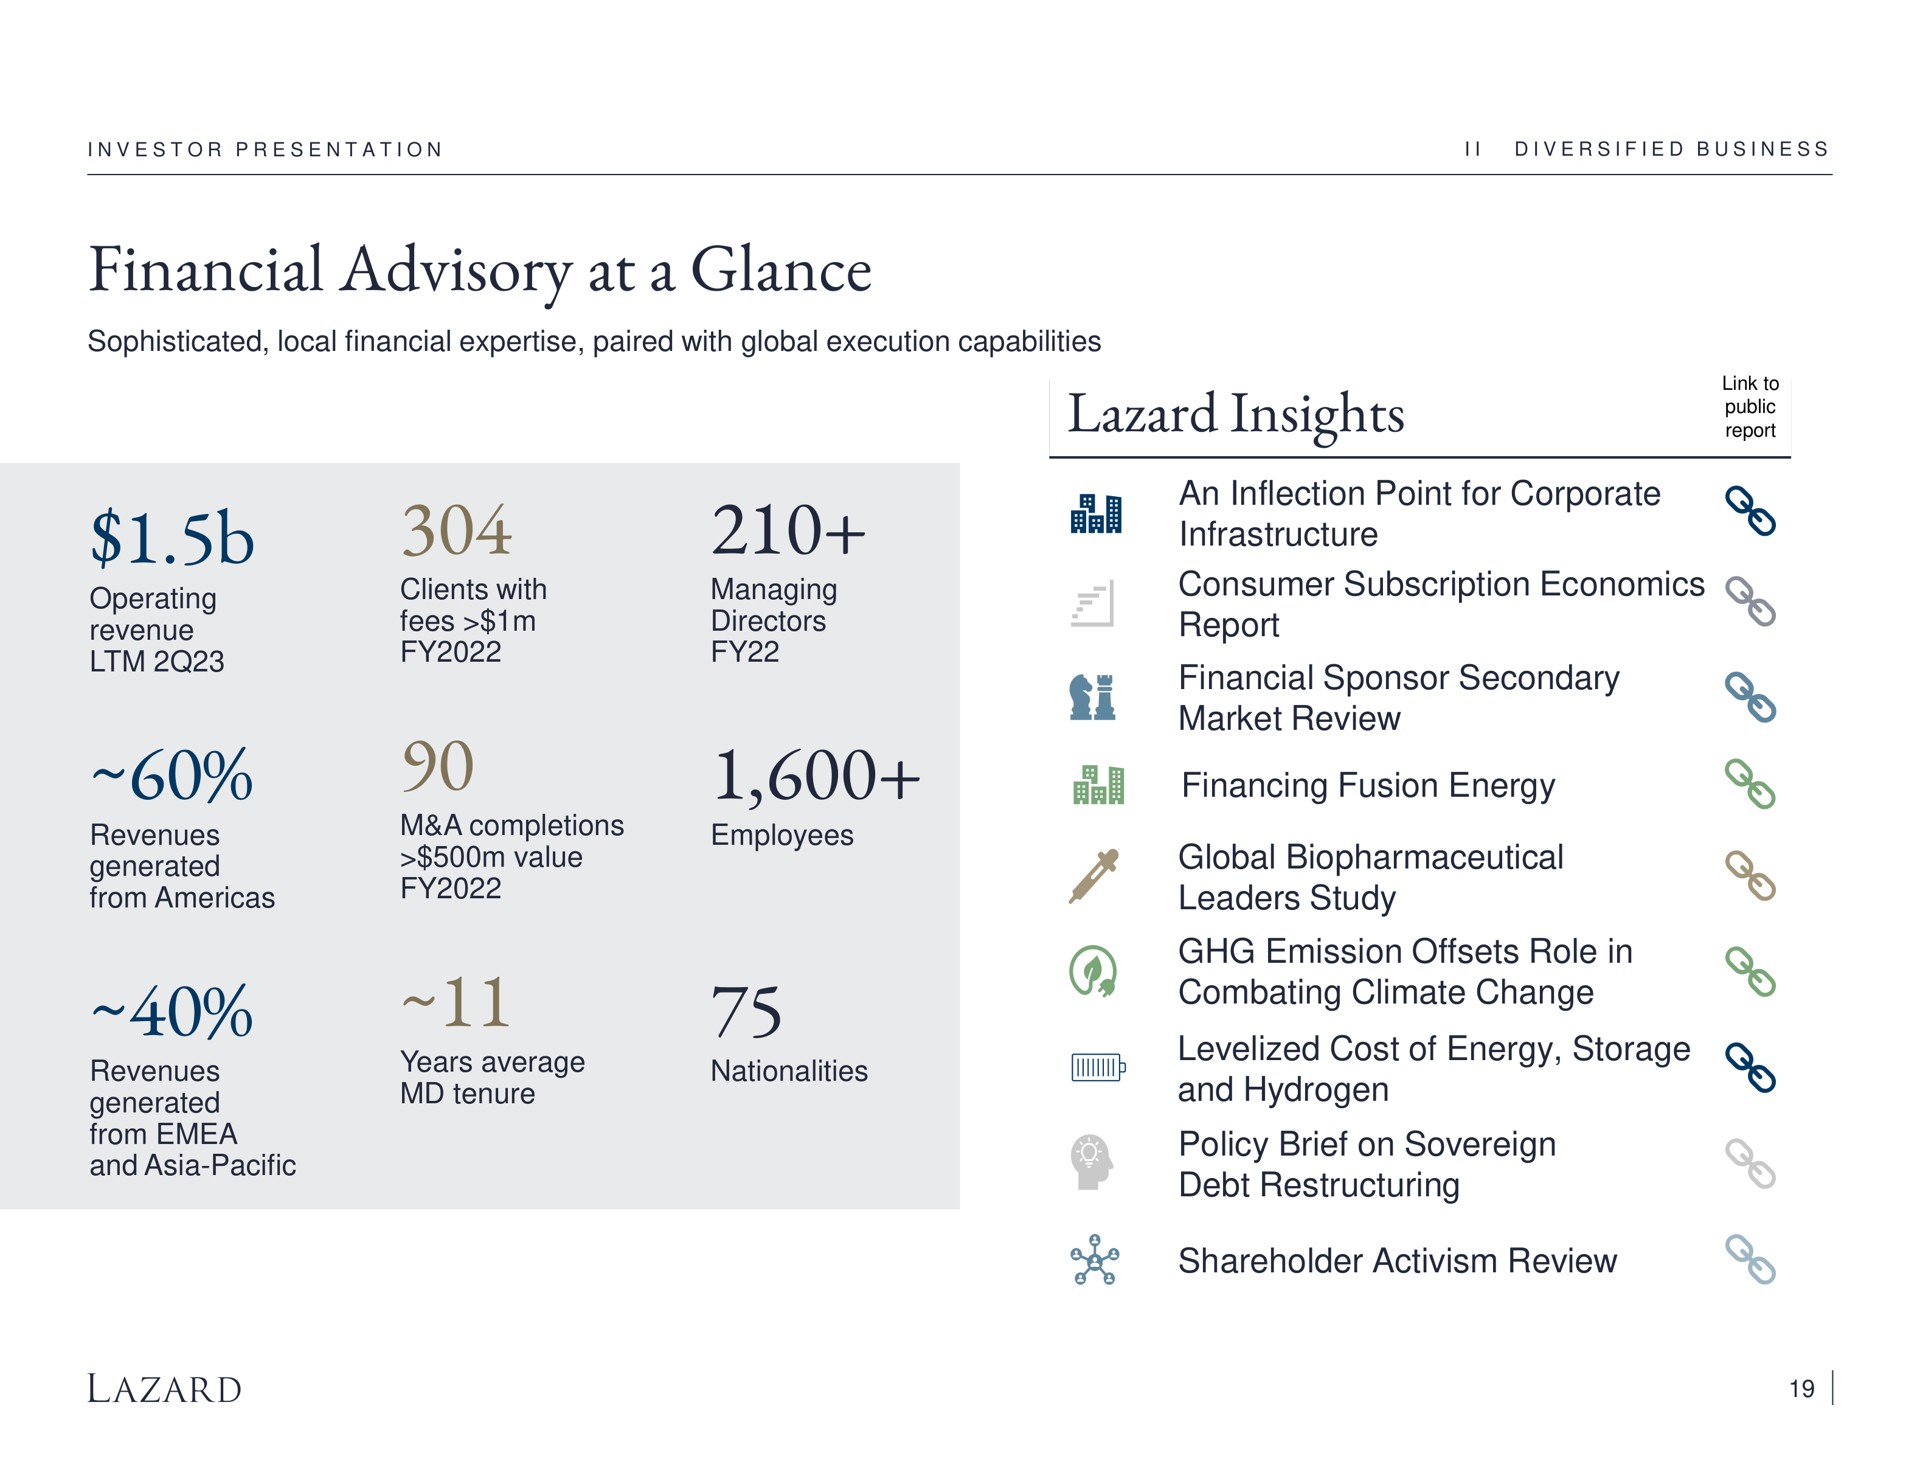 financial advisory at a glance insights an inflection point for corporate infrastructure consumer subscription economics report financial sponsor secondary market review financing fusion energy global leaders study emission offsets role in combating climate change cost of energy storage and hydrogen policy brief on sovereign debt shareholder activism review from so so so so so | Lazard